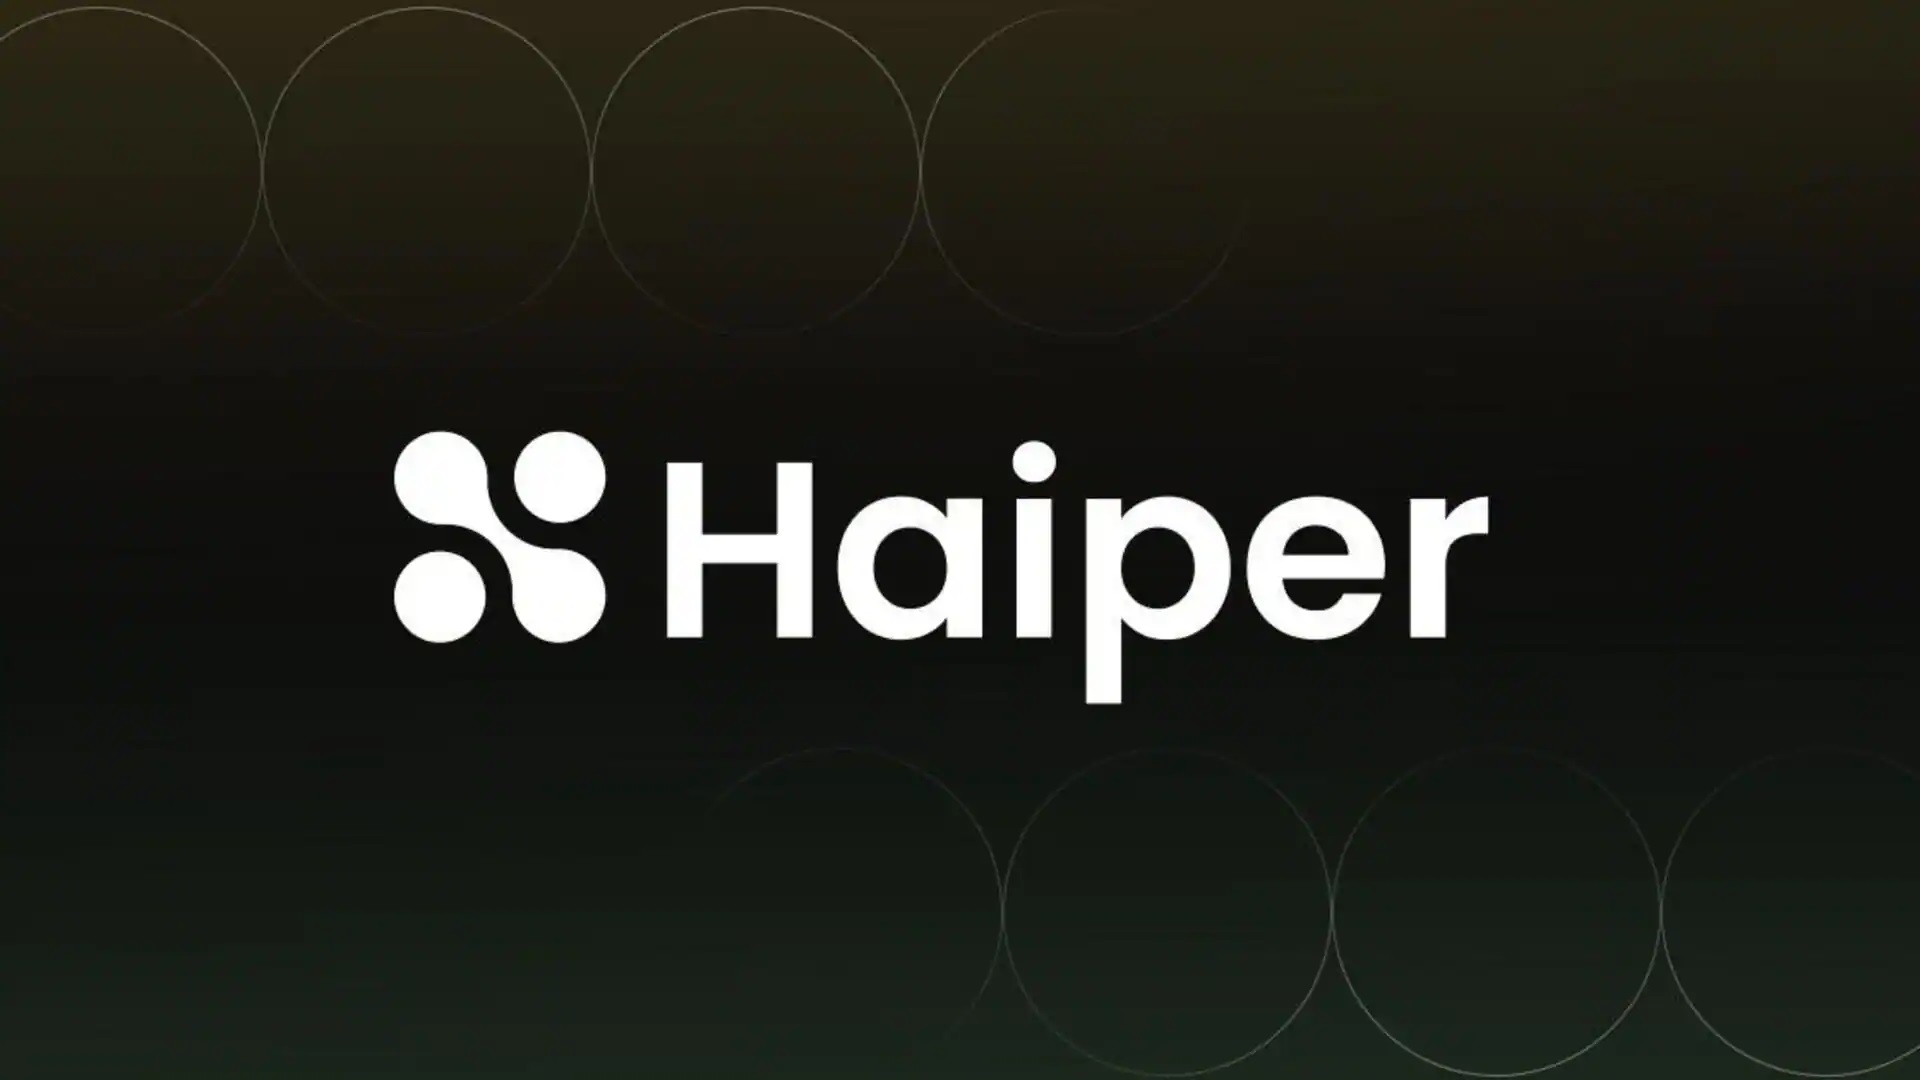 Haiper: The New Player In AI Video Generation